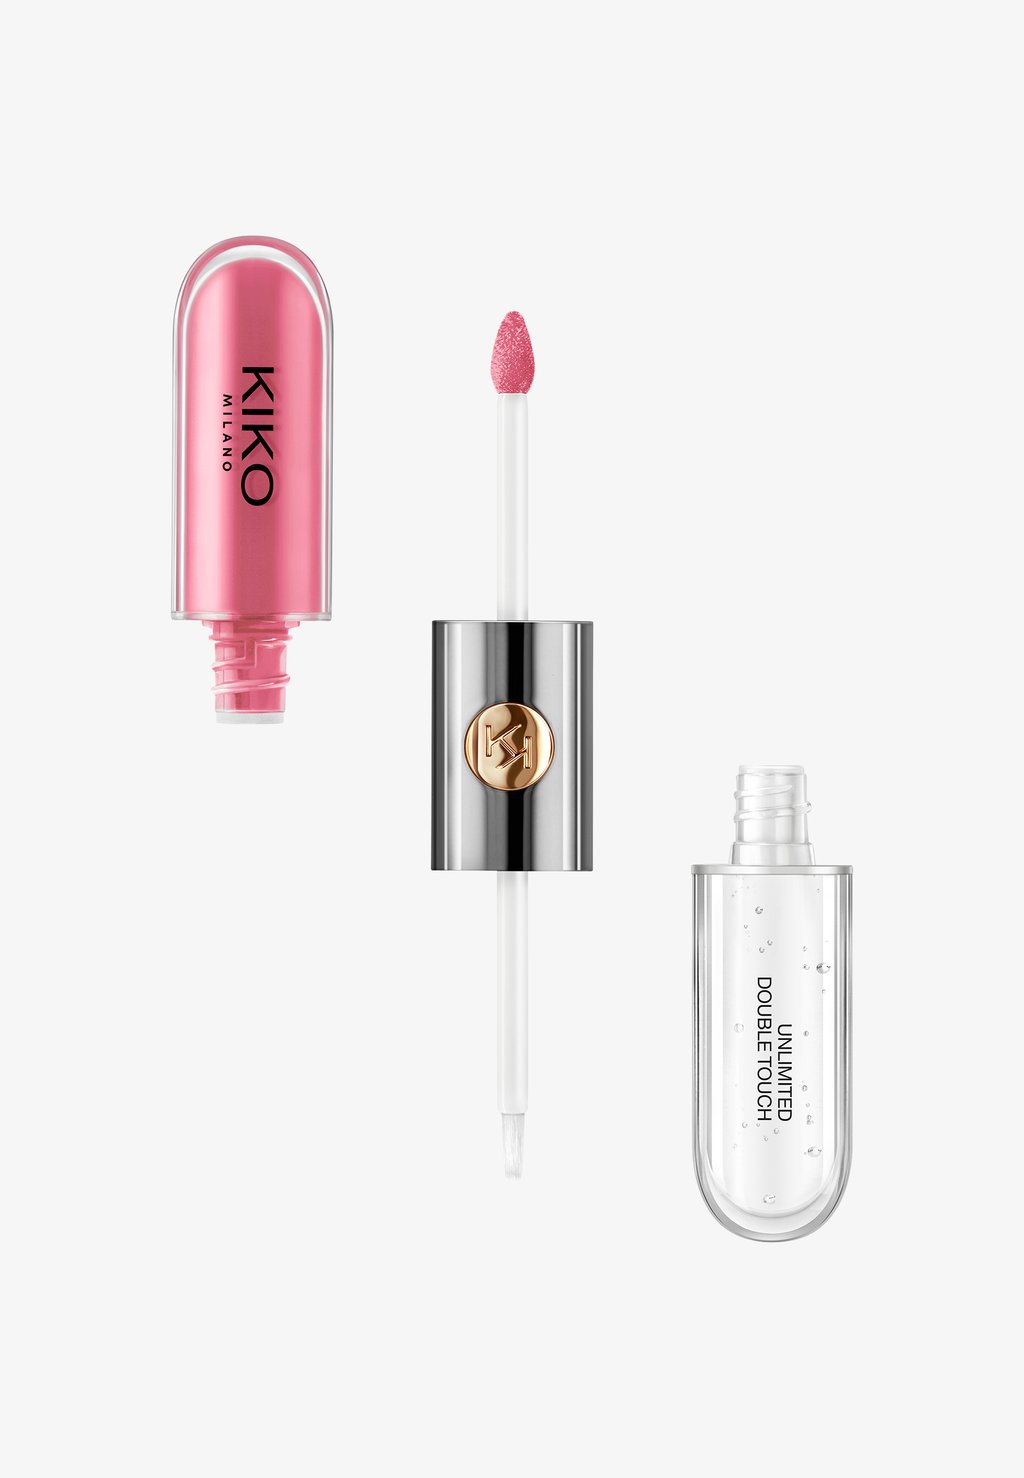 Тинт для губ Unlimited Double Touch KIKO Milano, цвет 119 rhododendron pink